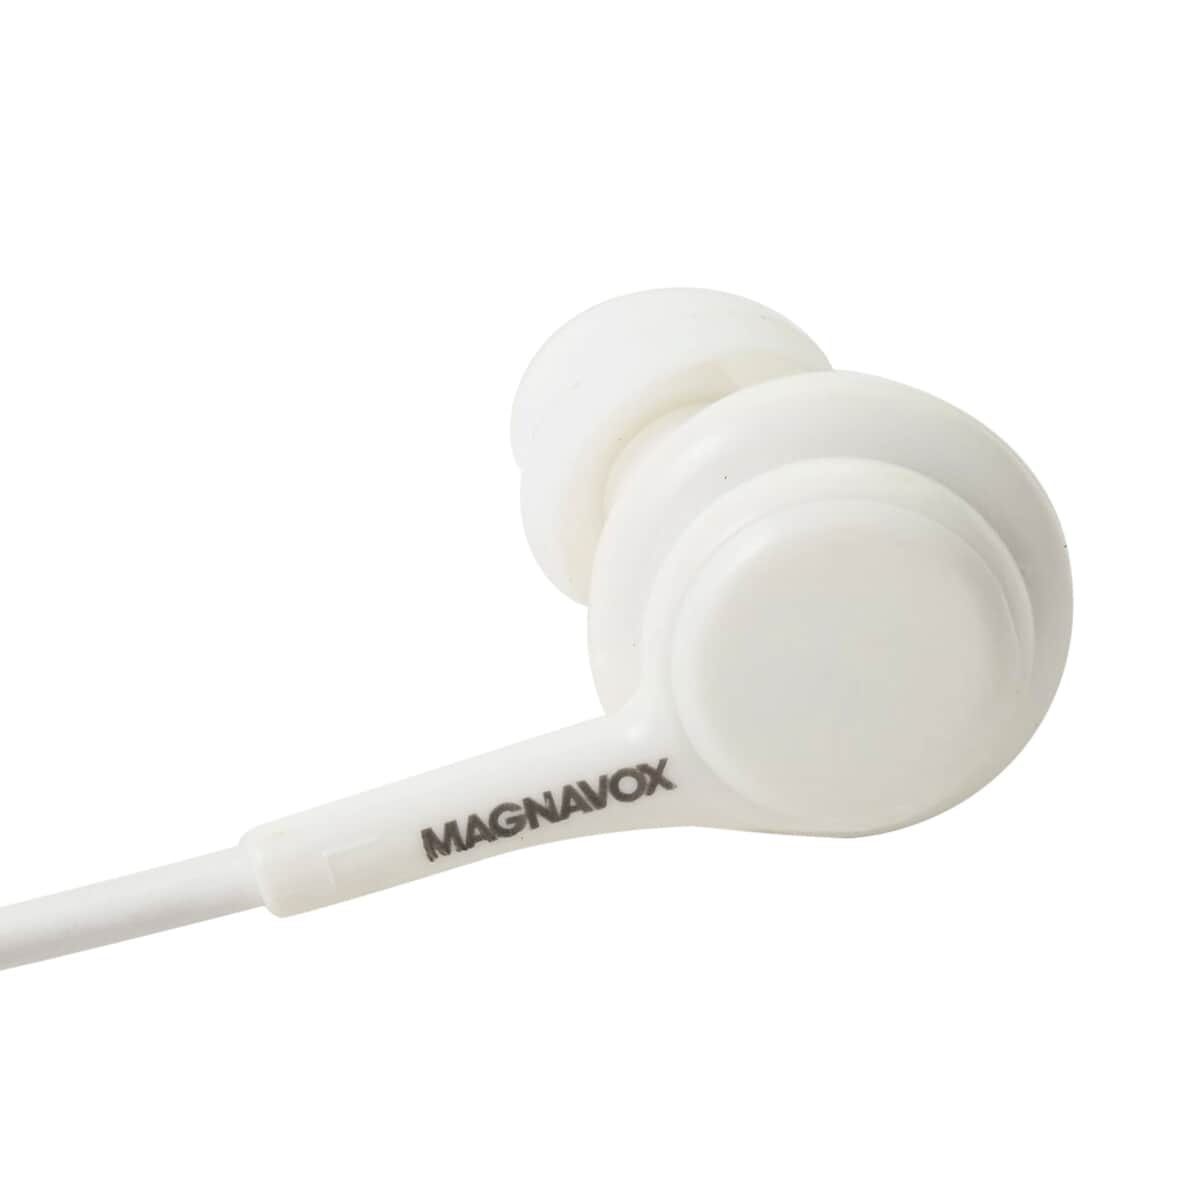 Magnavox Extreme Bass Bluetooth Earbuds with Microphone - White image number 6